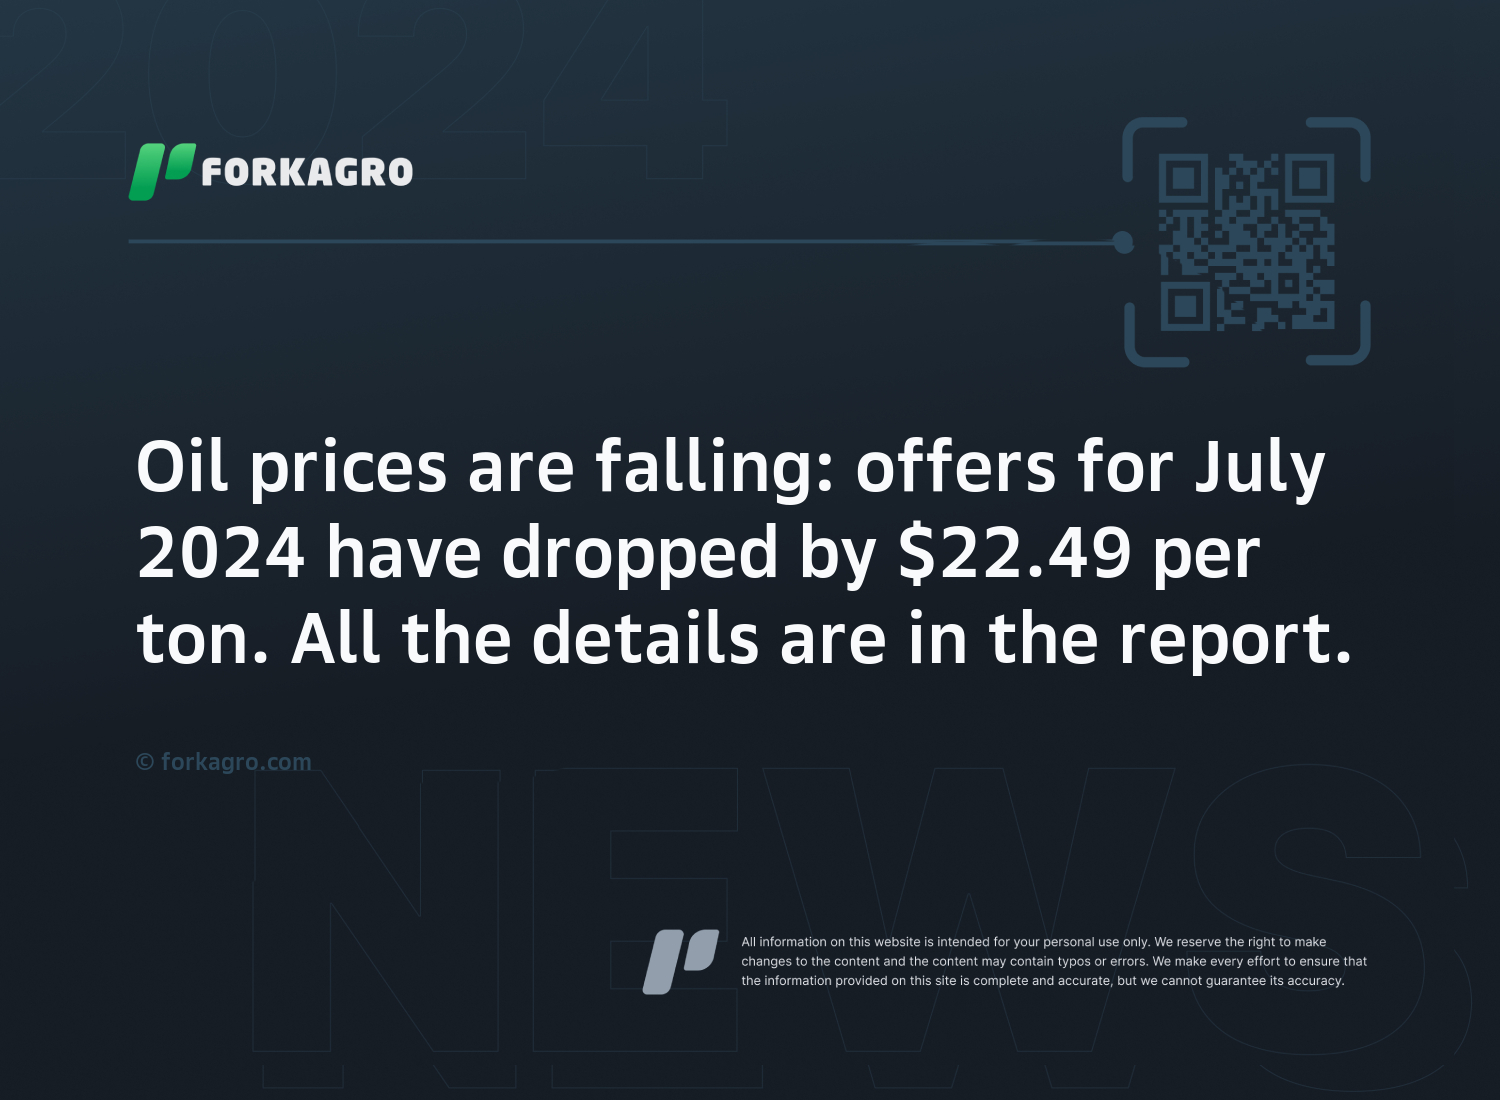 Oil prices are falling: offers for July 2024 have dropped by $22.49 per ton. All the details are in the report.